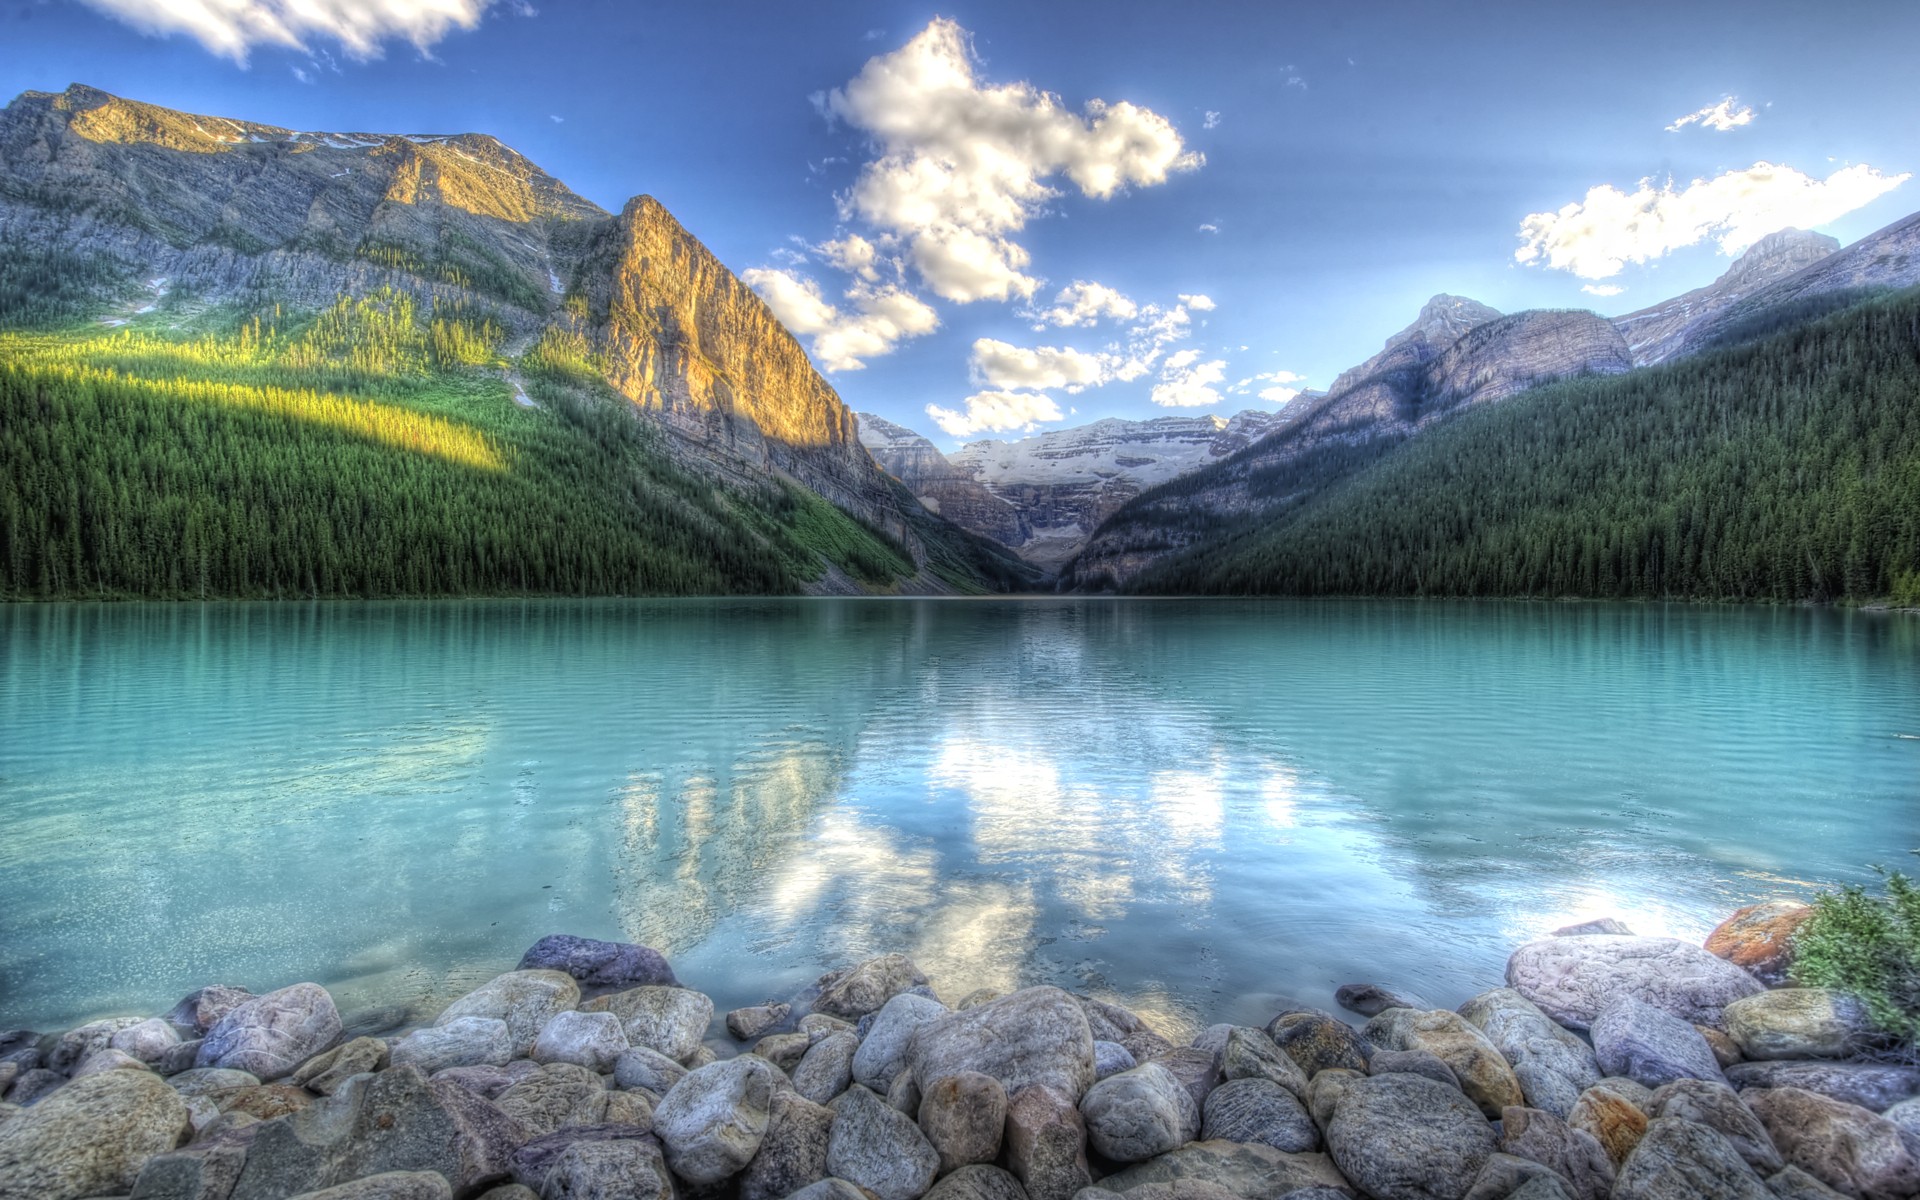 mountains, clouds, landscapes, nature, rocks, HDR photography, reflections, blue skies - desktop wallpaper